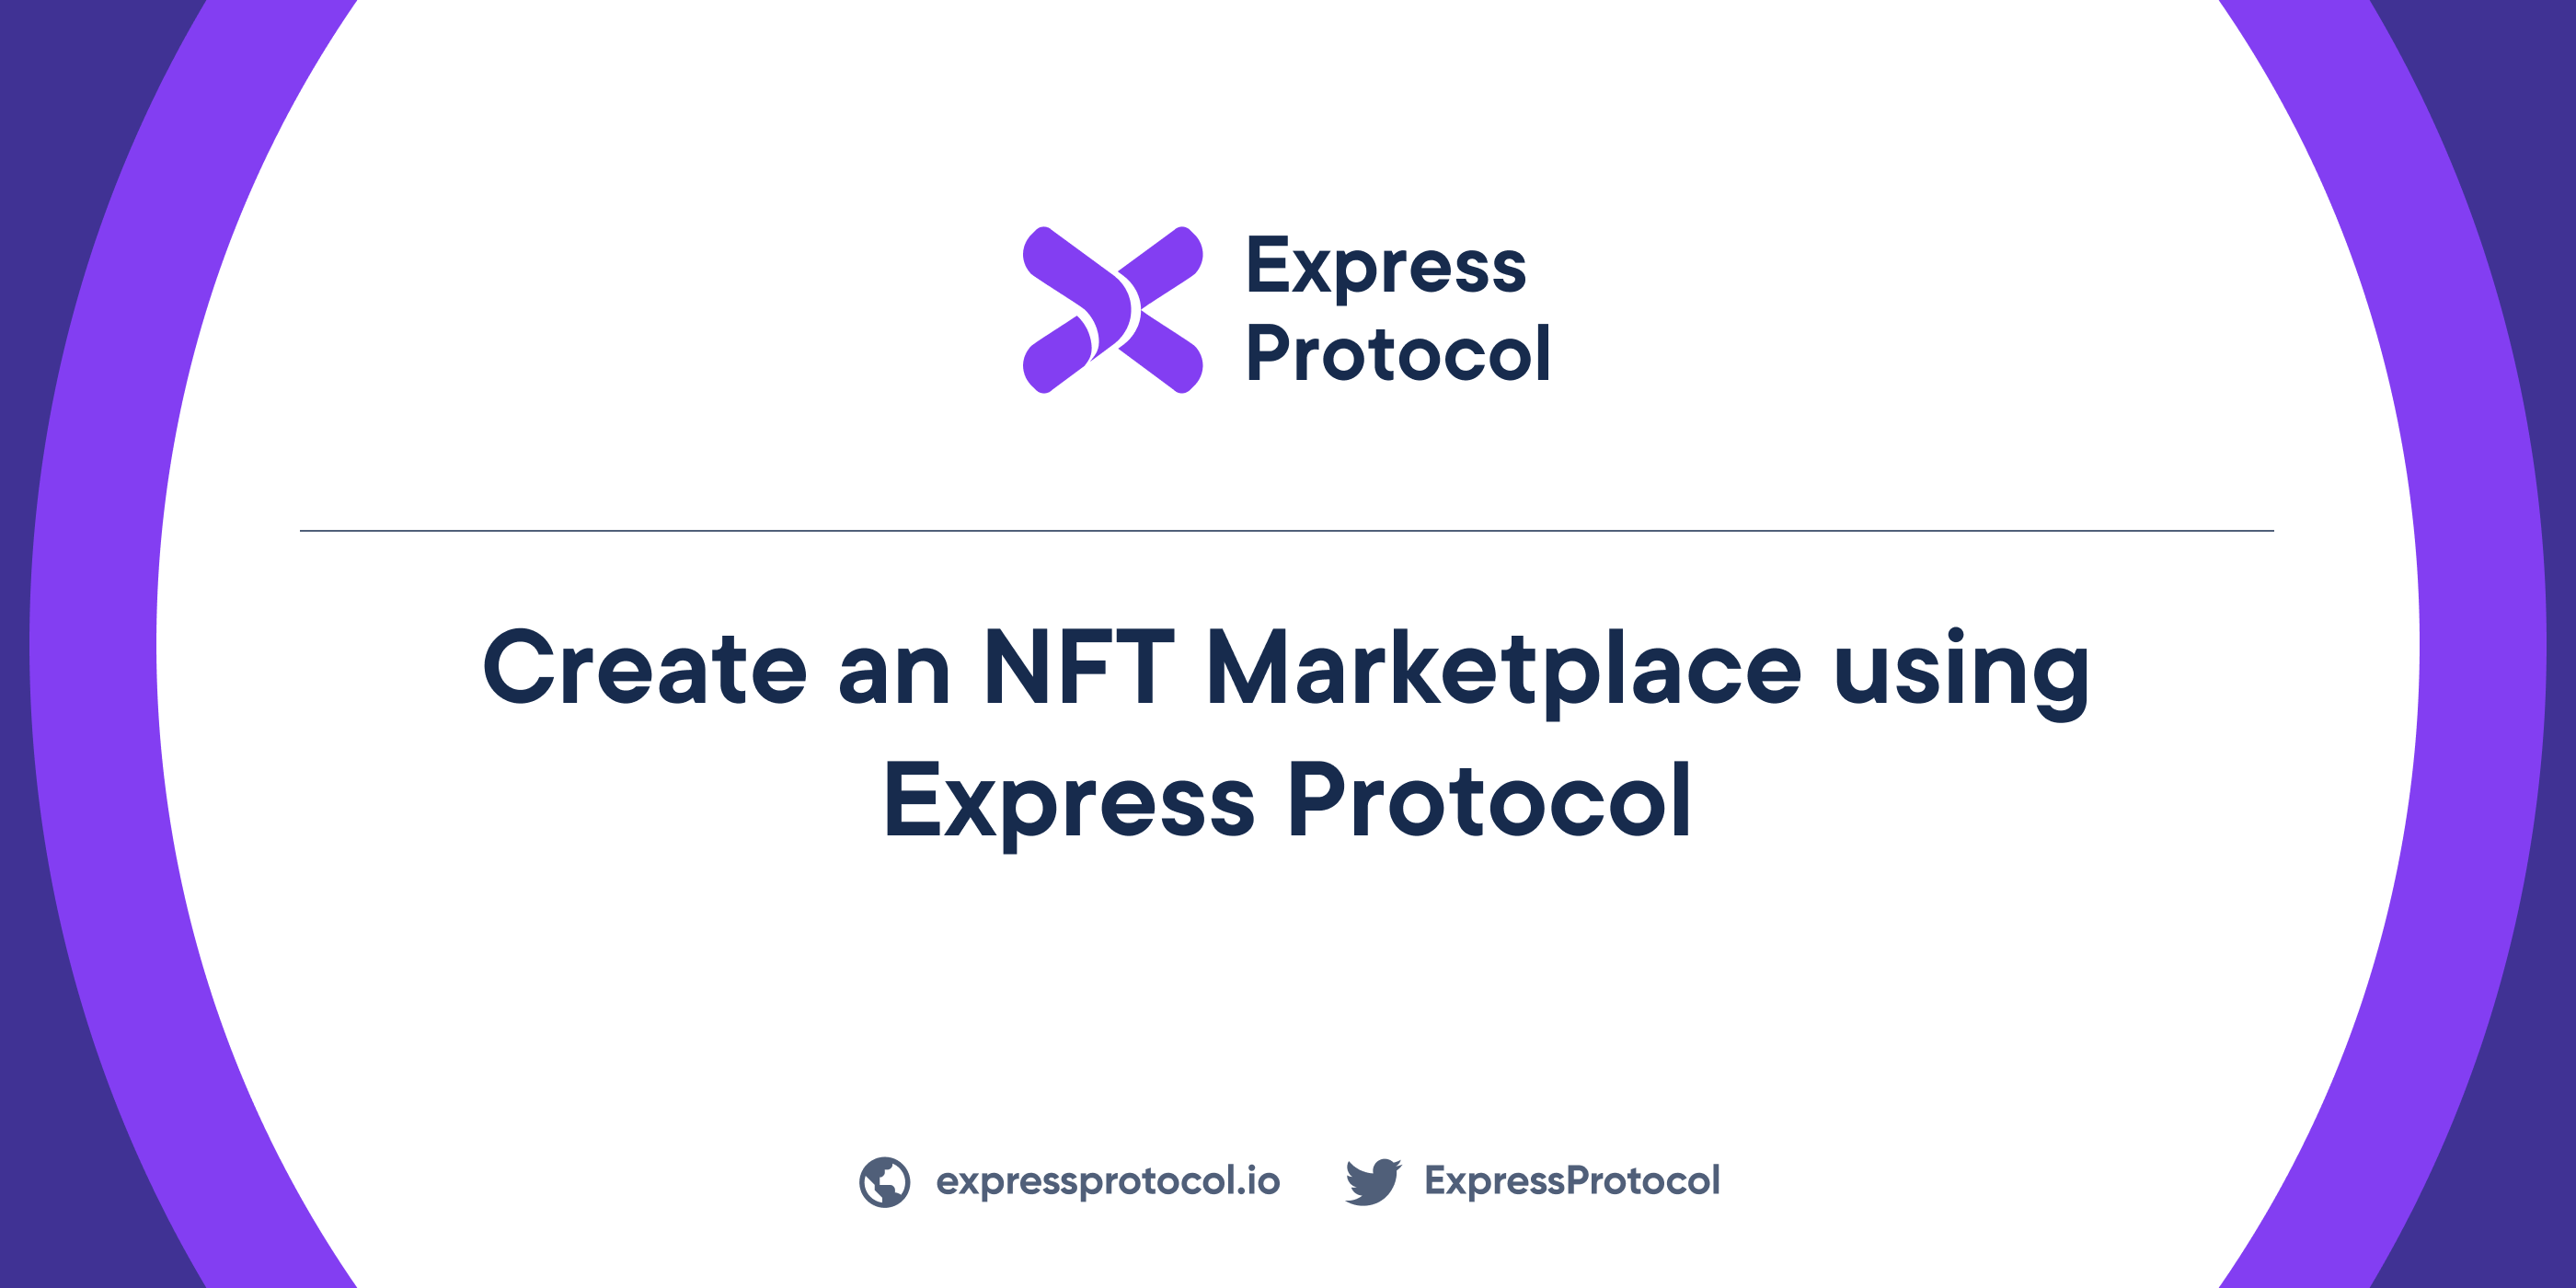 How to create an NFT marketplace